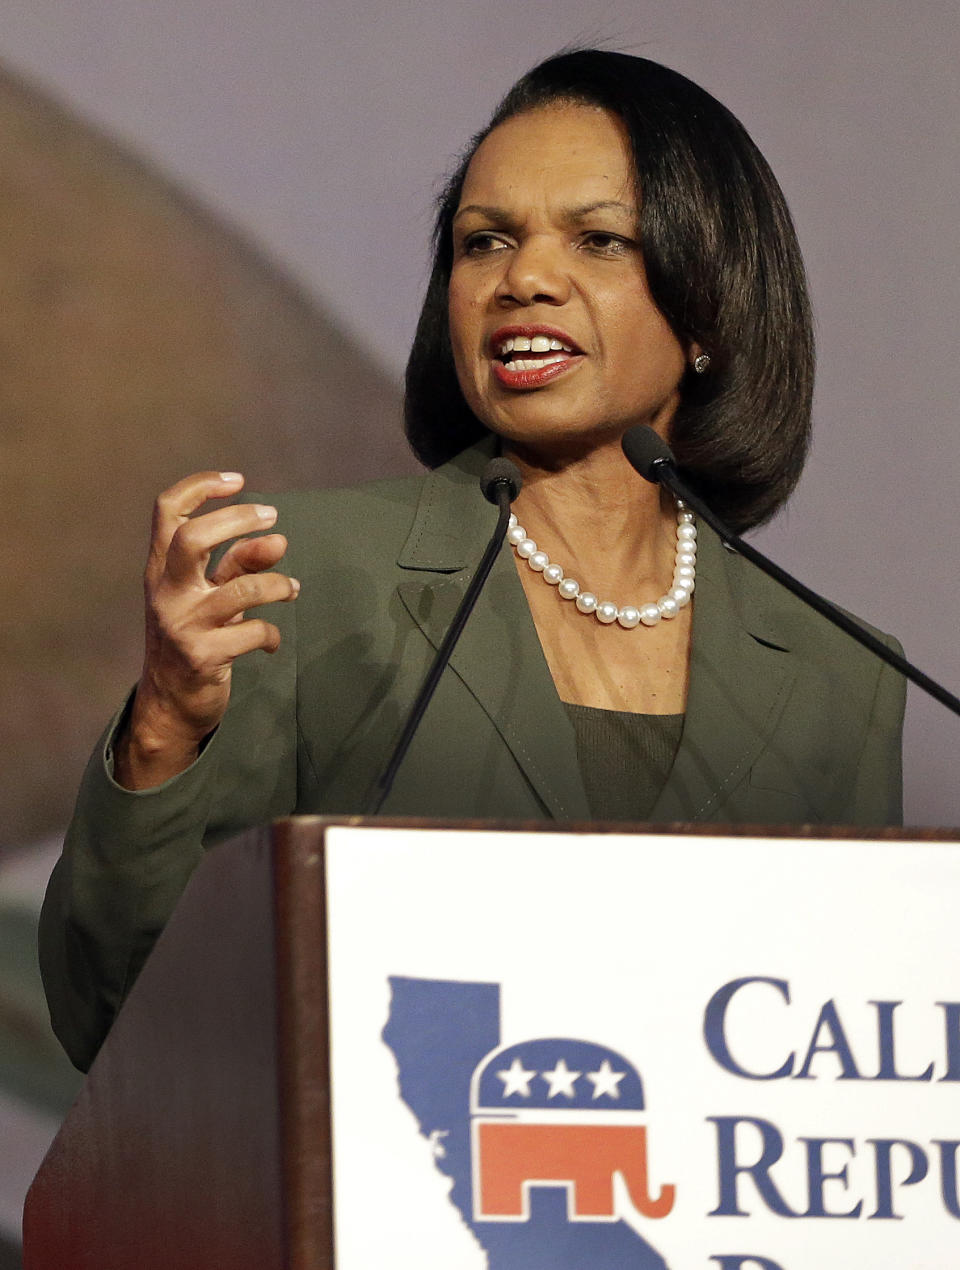 Former Secretary of State Condoleezza Rice gestures while speaking before the California Republican Party 2014 Spring Convention Saturday, March 15, 2014, in Burlingame, Calif. (AP Photo/Ben Margot)